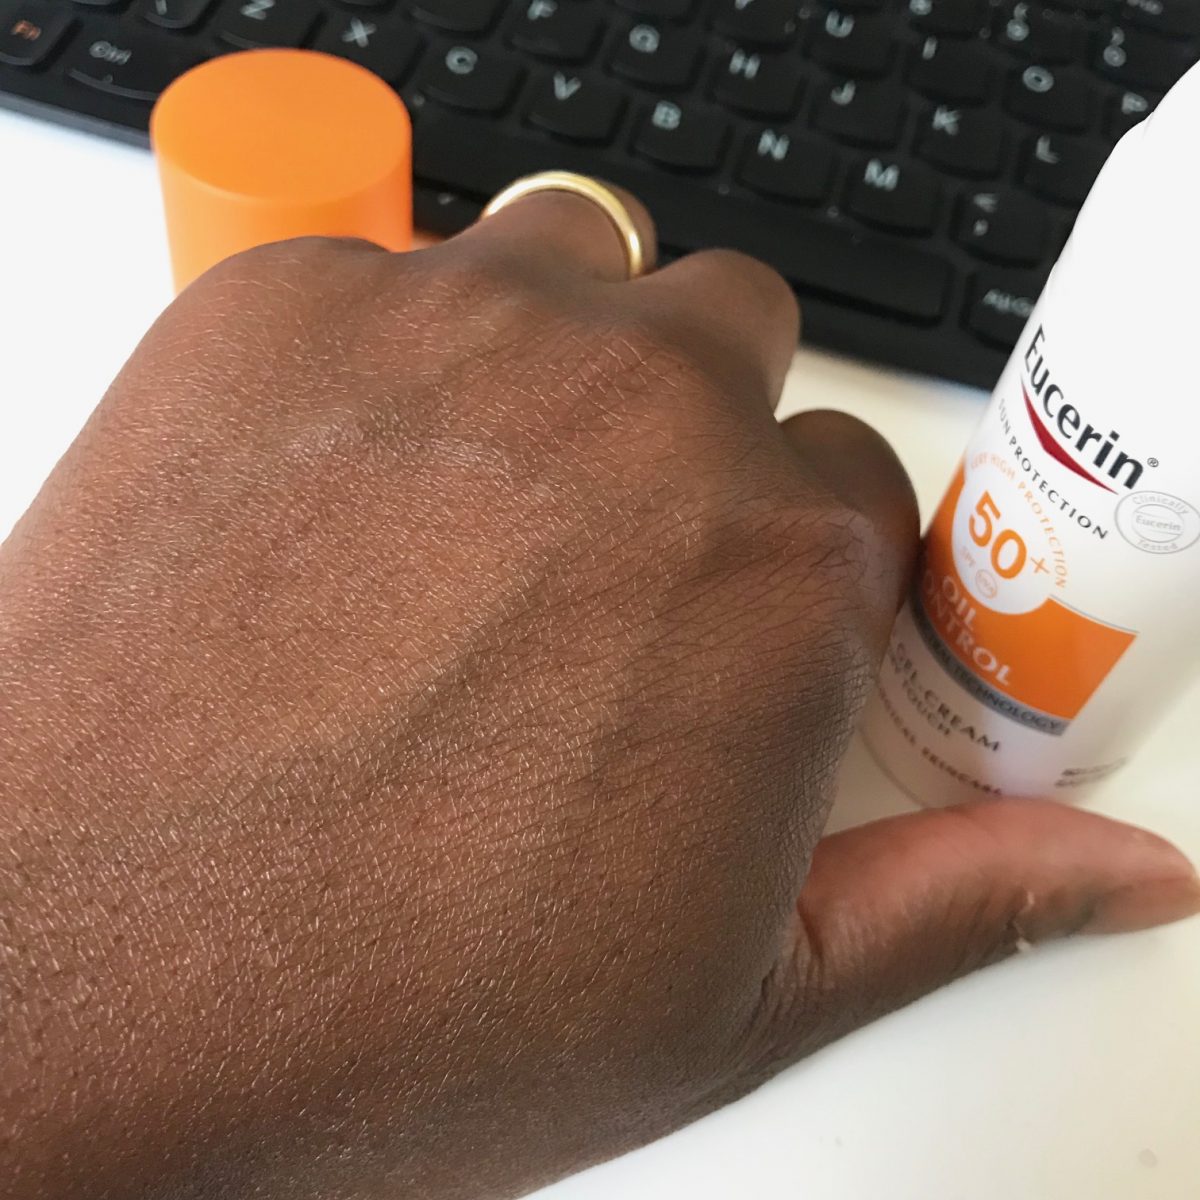 Love your skin with Eucerin oil control SPF 50! 